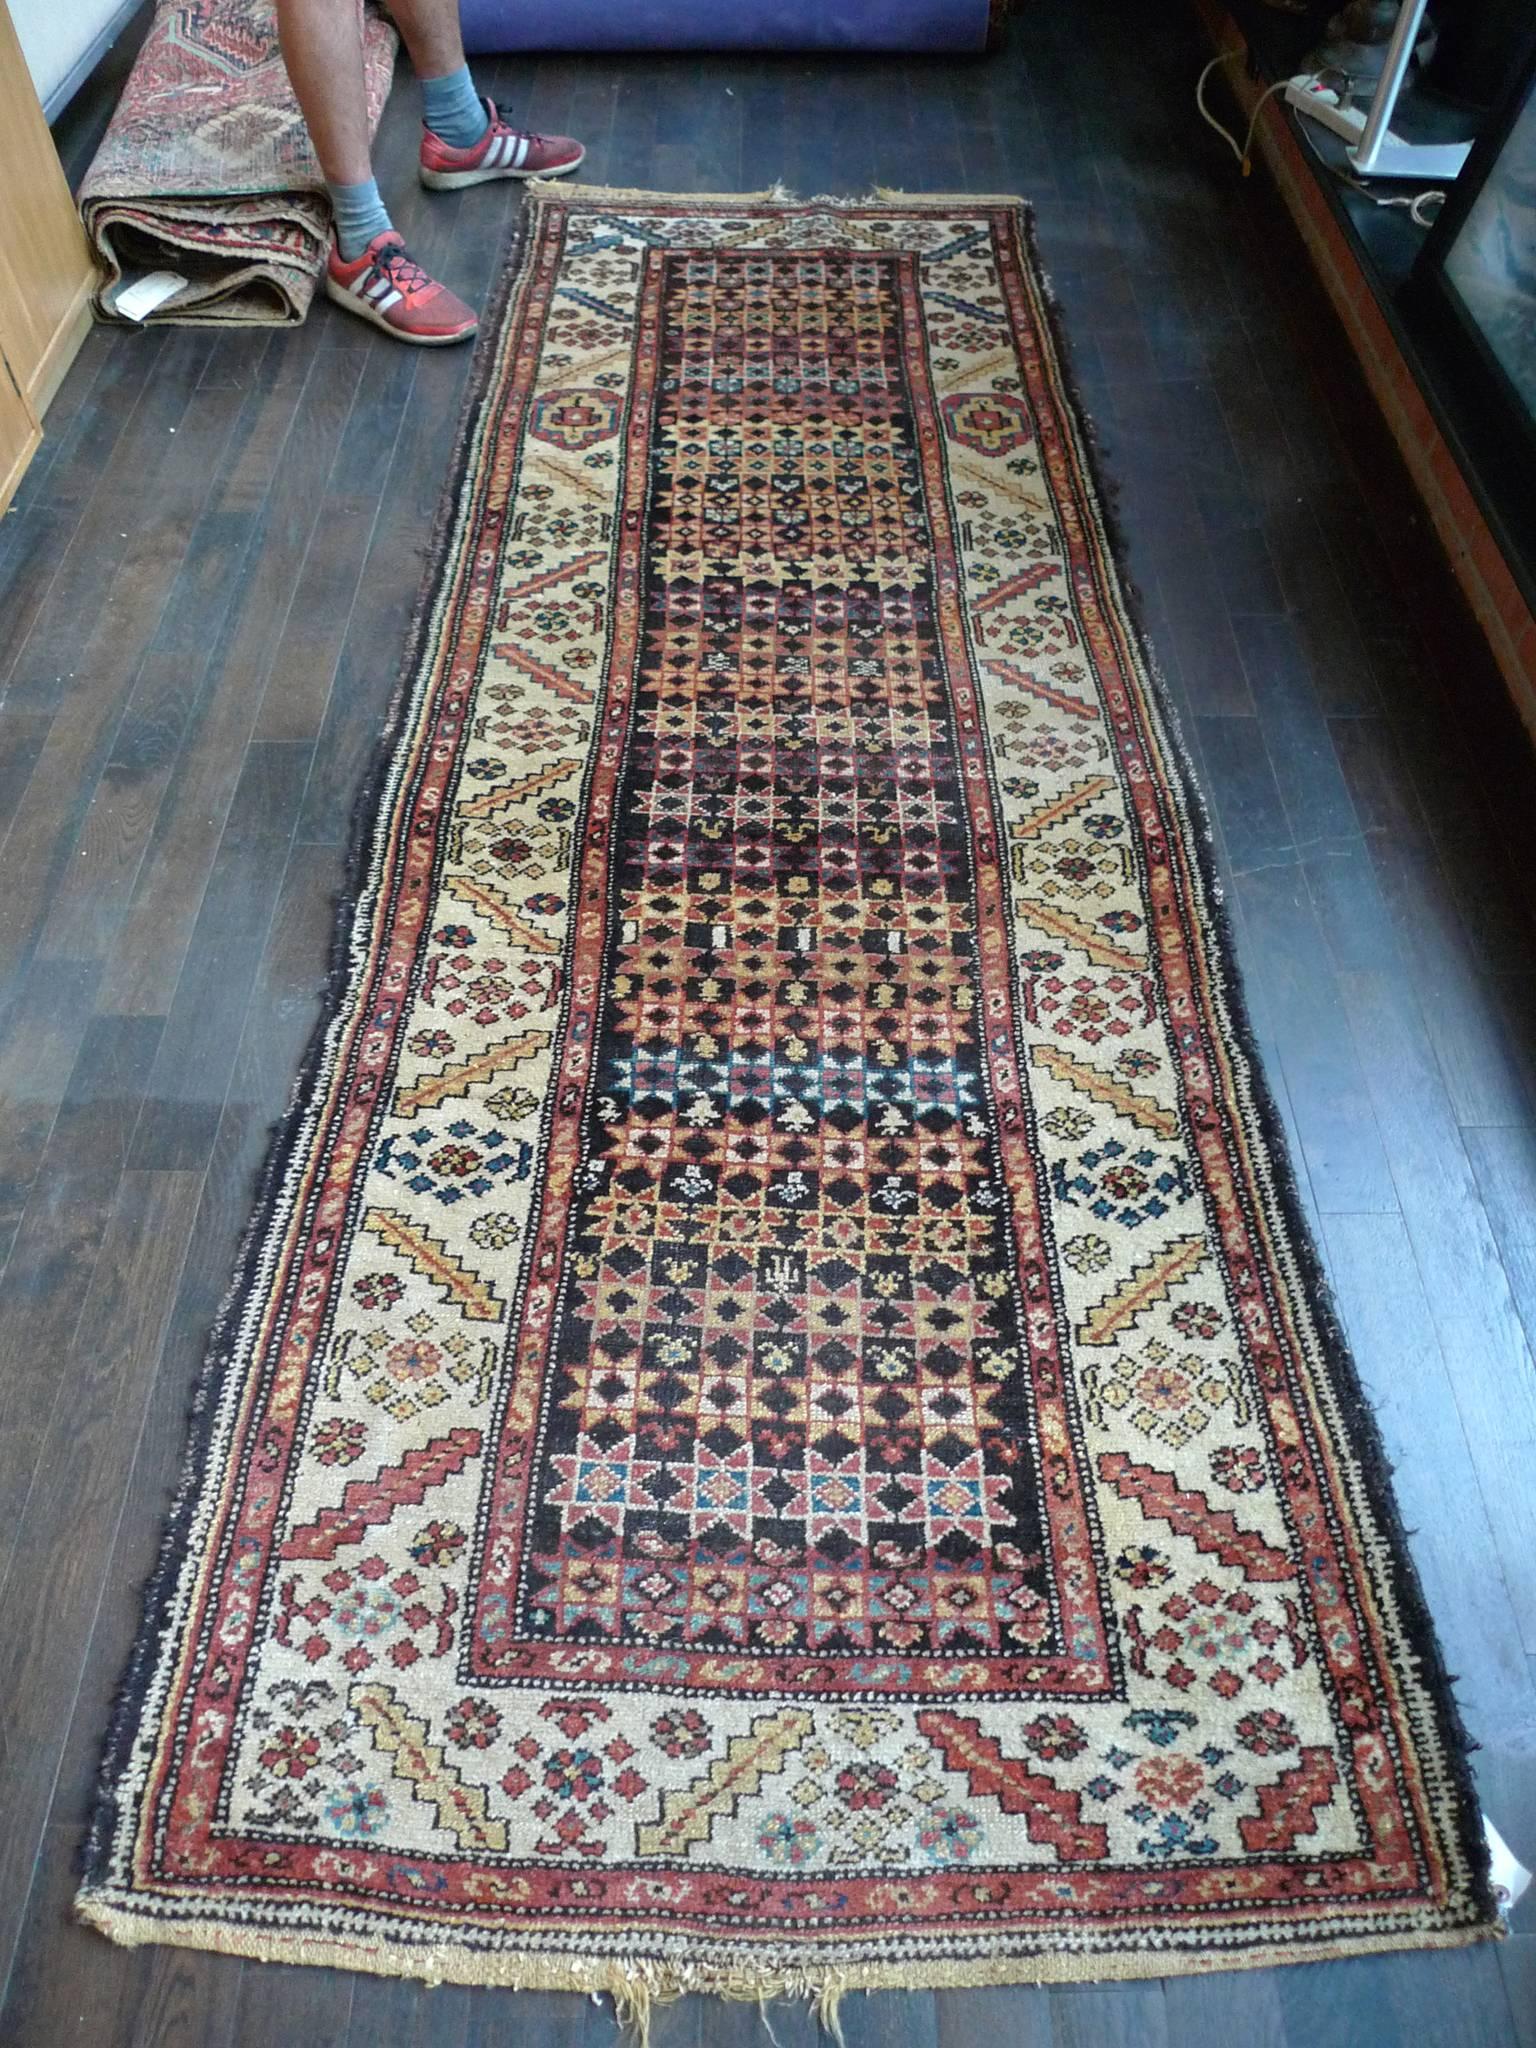 The design of this colorful Turkish runner consists of a central rectangular field in black with star-shaped and geometric forms repeating in columns. The surrounding borders contain other geometric shapes and floral motifs in a pattern of blues,